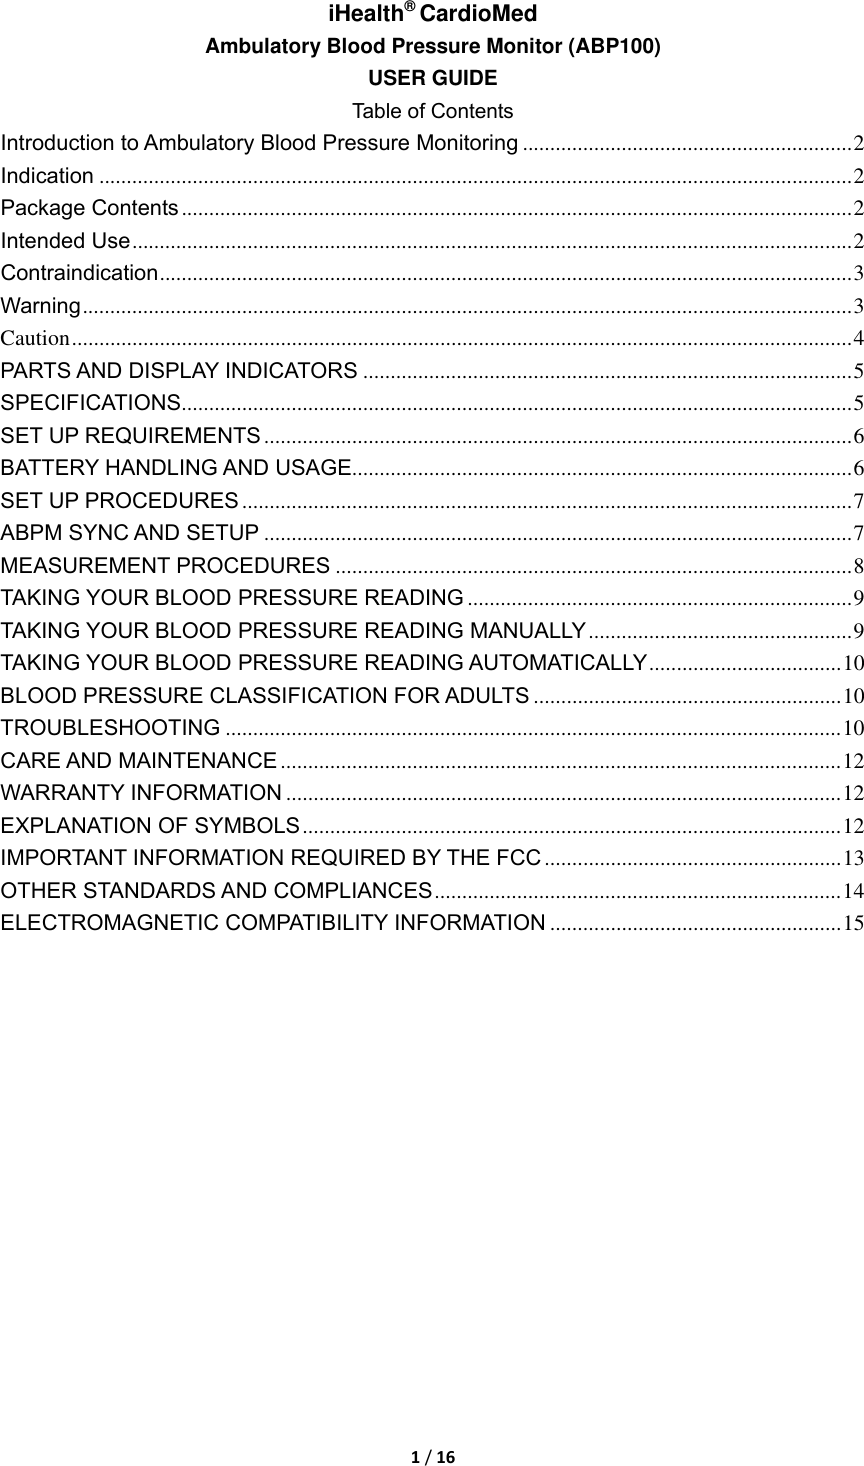 Page 1 of iHealth Labs ABP100 iHealth CardioMed User Manual